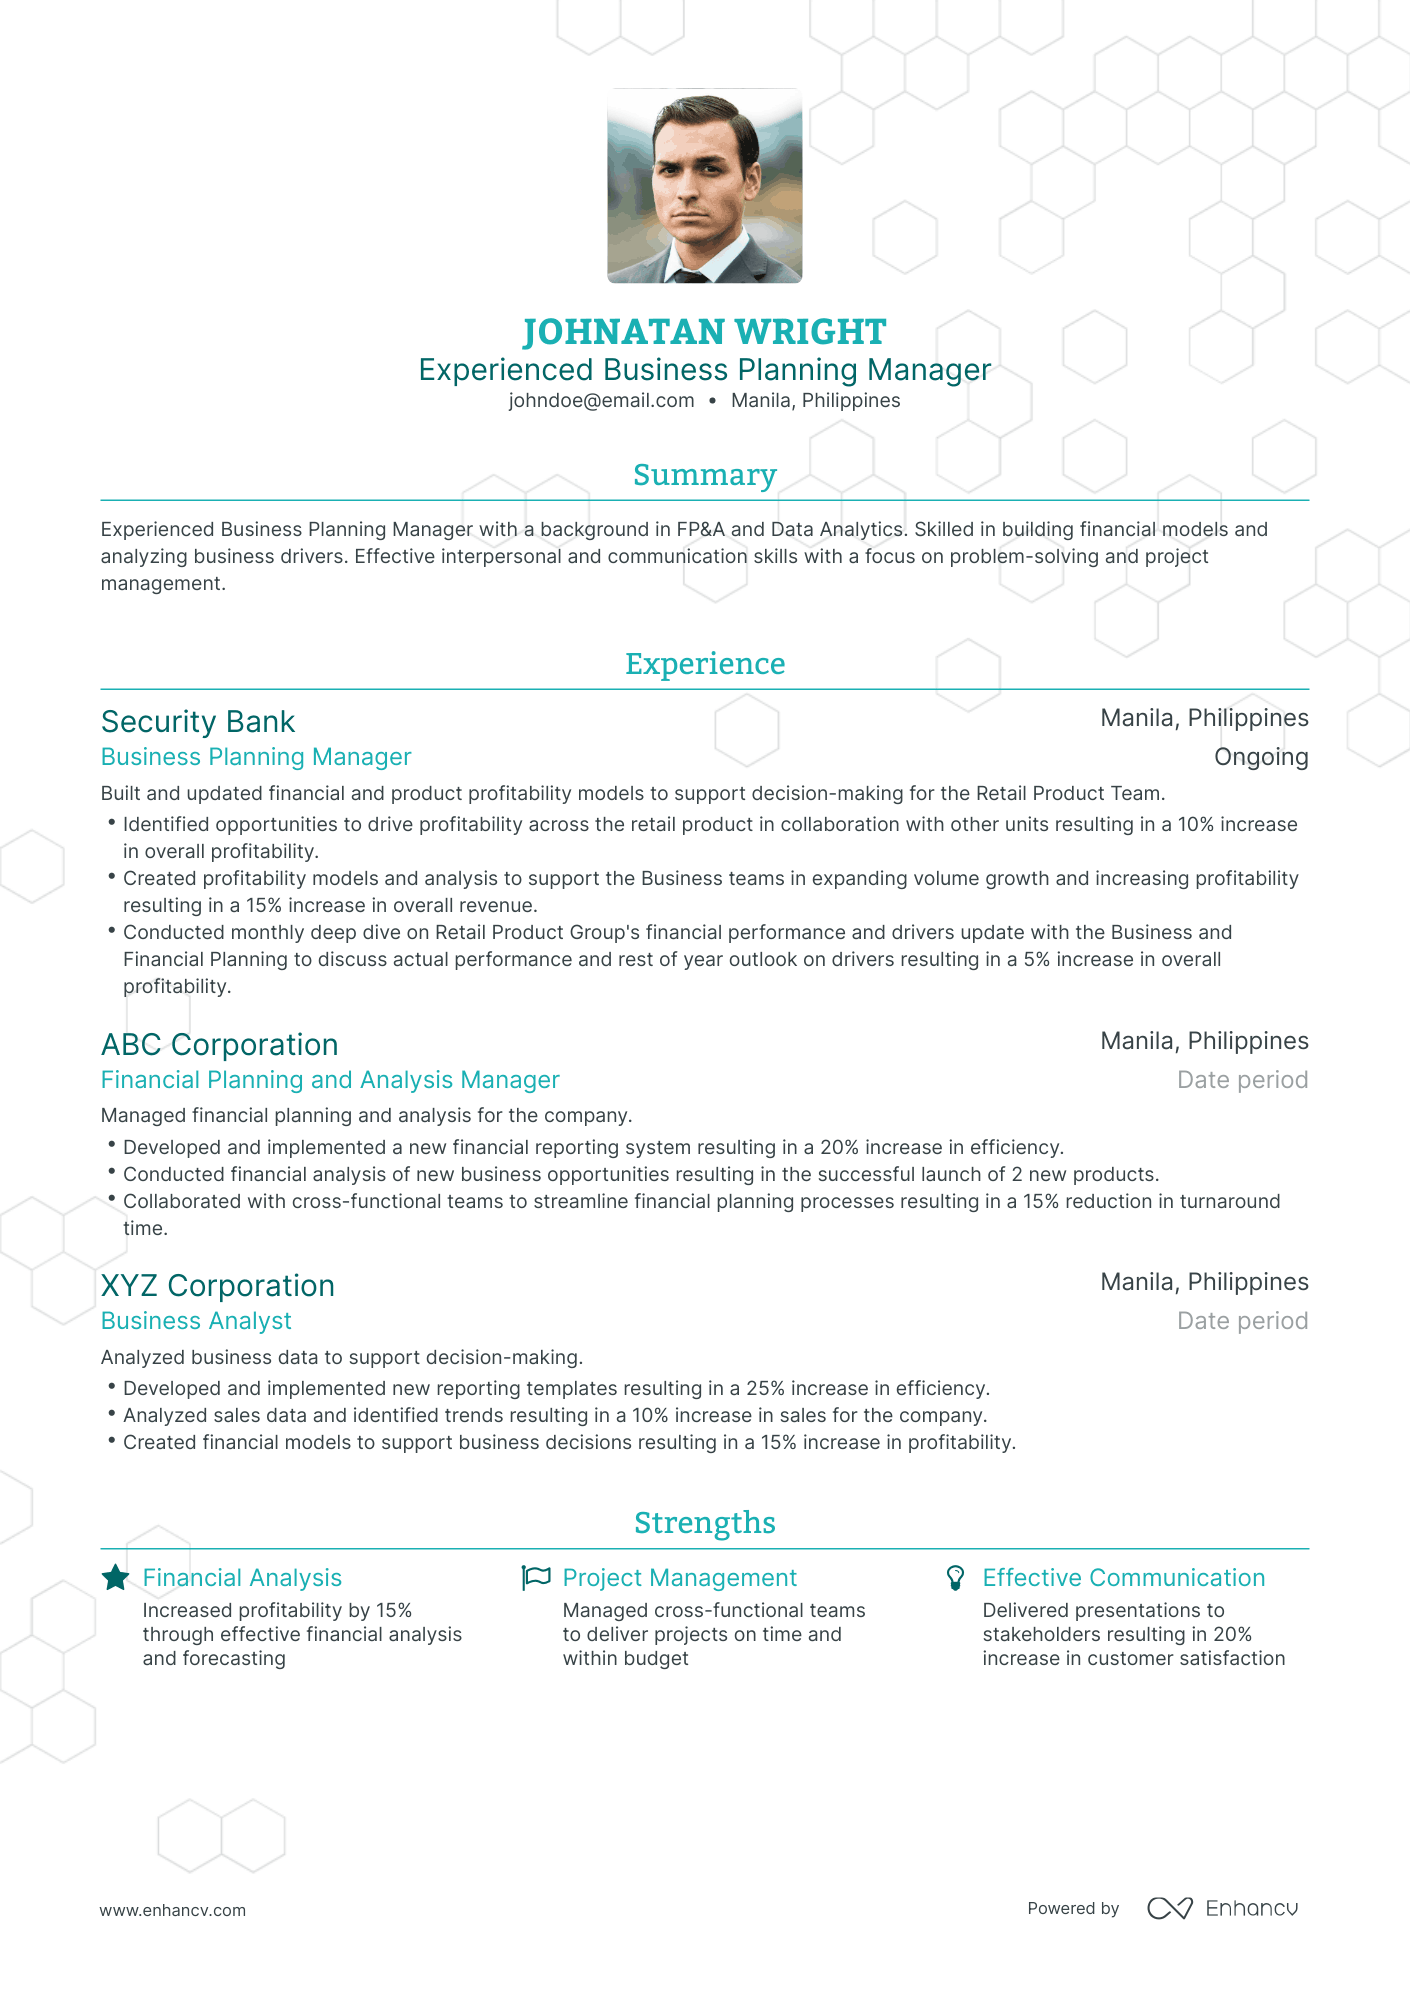 Traditional Business Planning Manager Resume Template